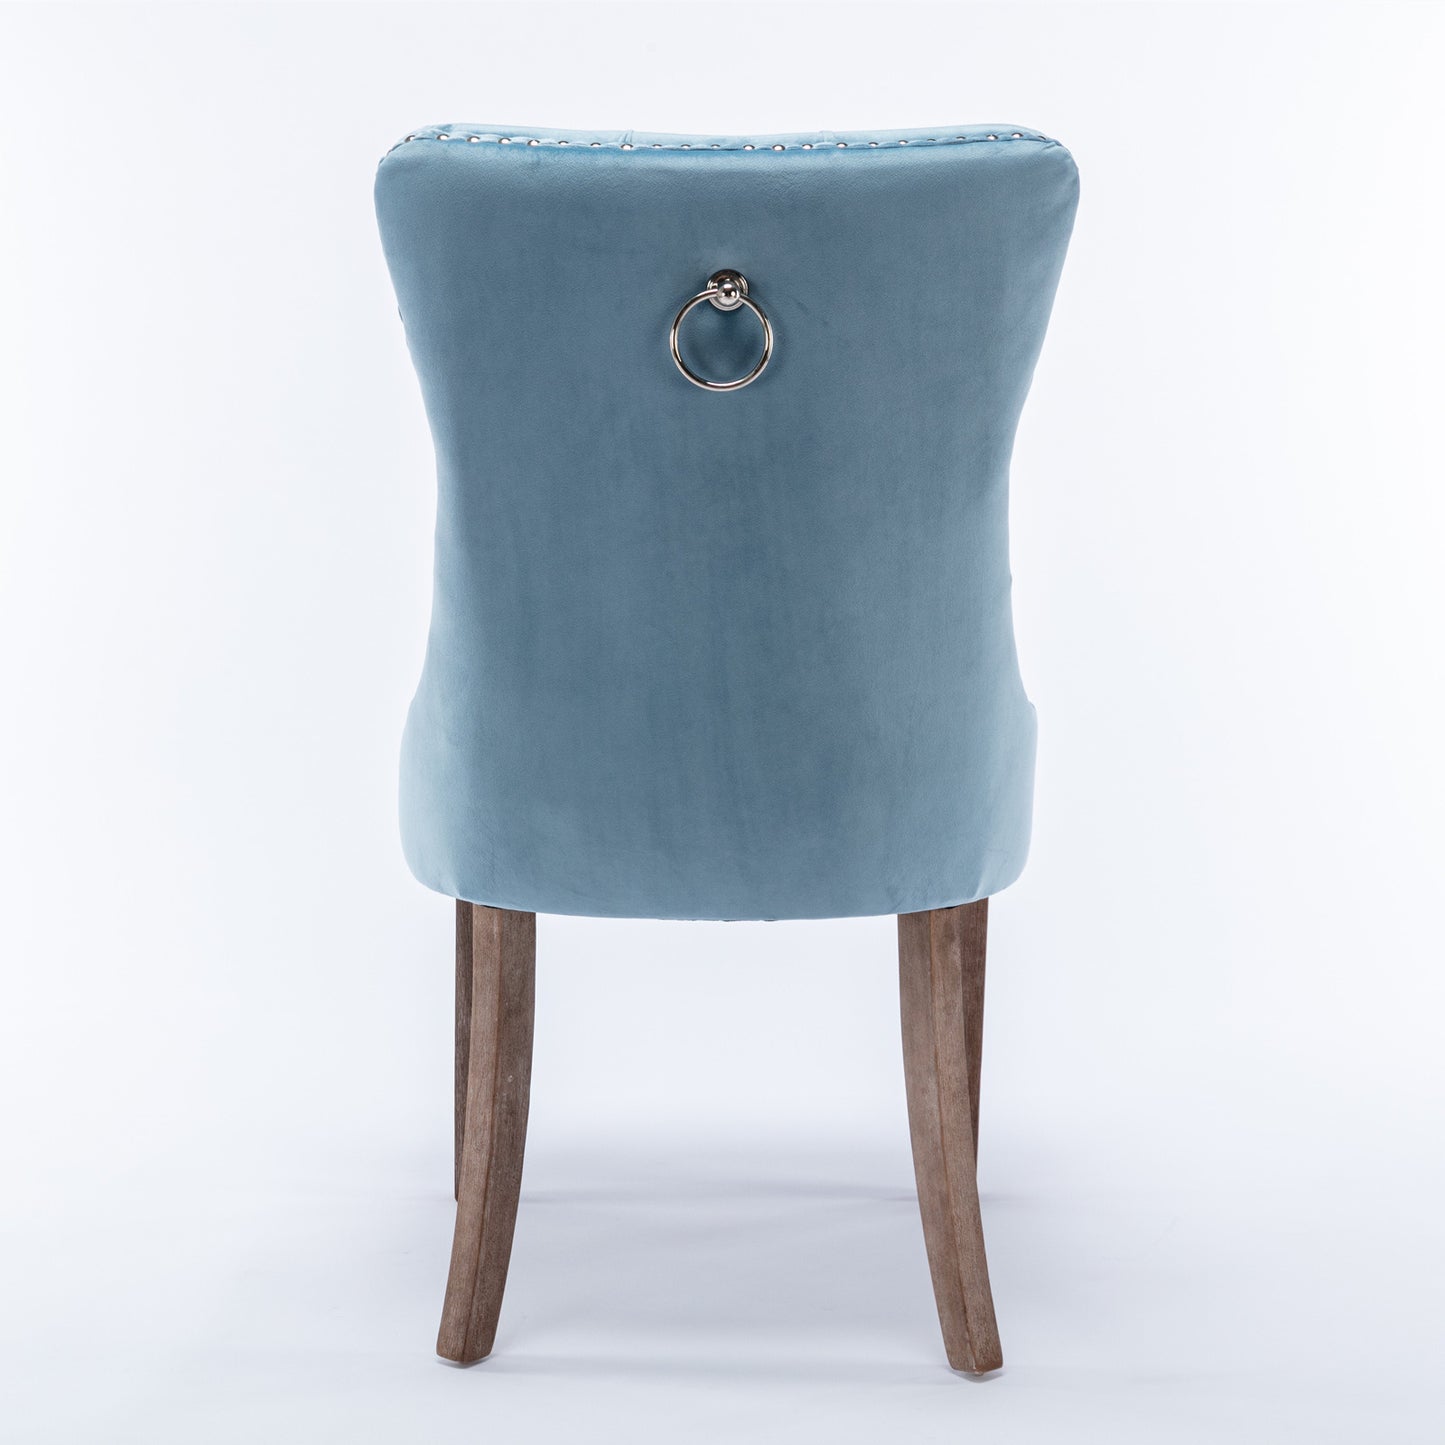 nikki collection modern high-end tufted dining chairs 2-pcs set, light blue